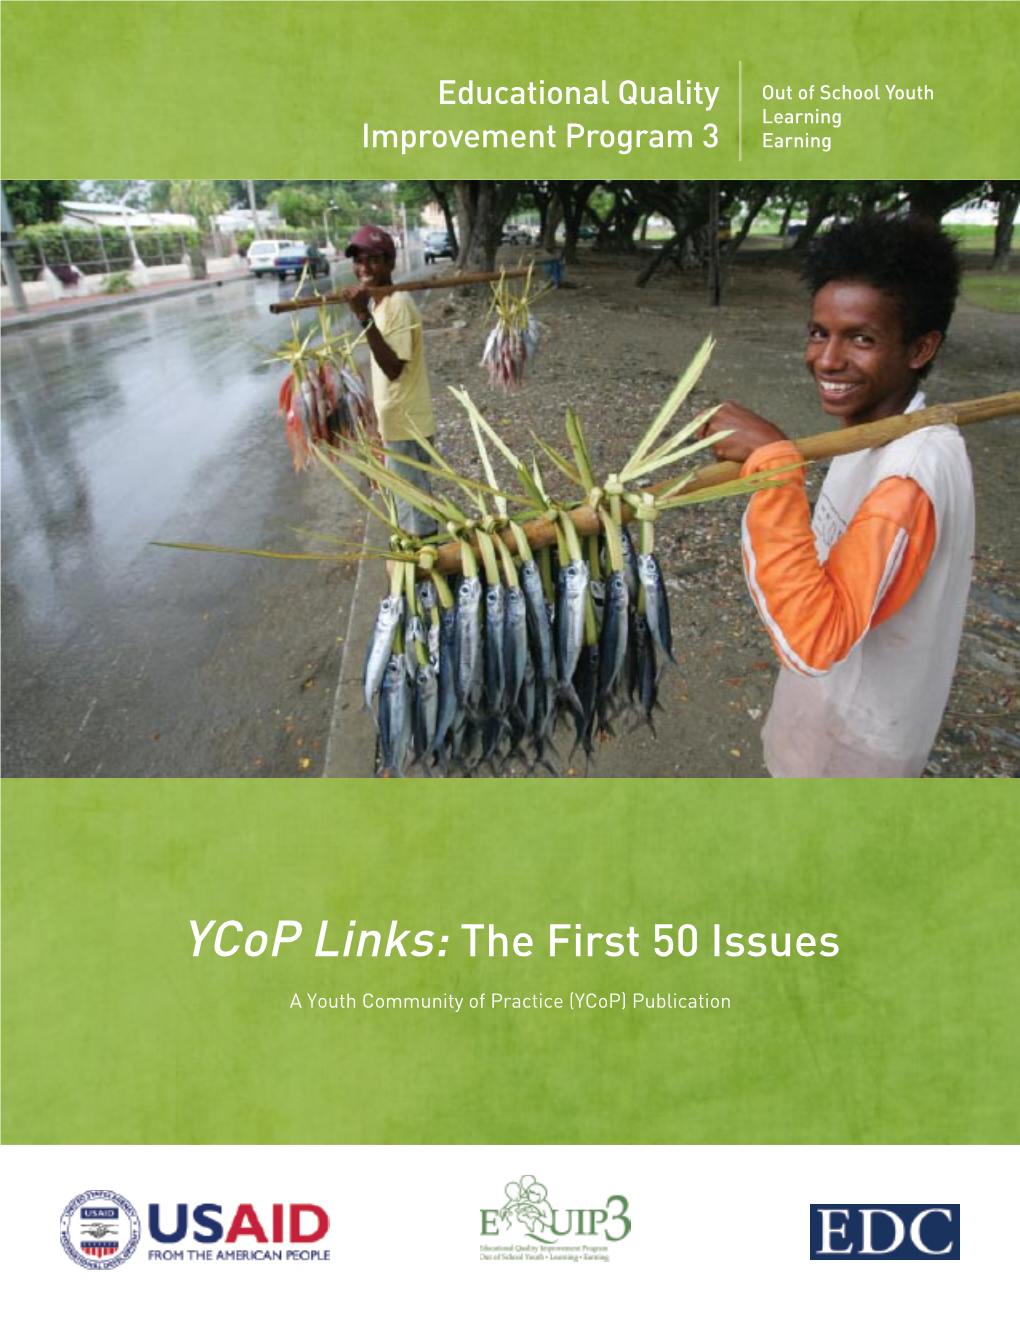 Ycop Links: the First 50 Issues